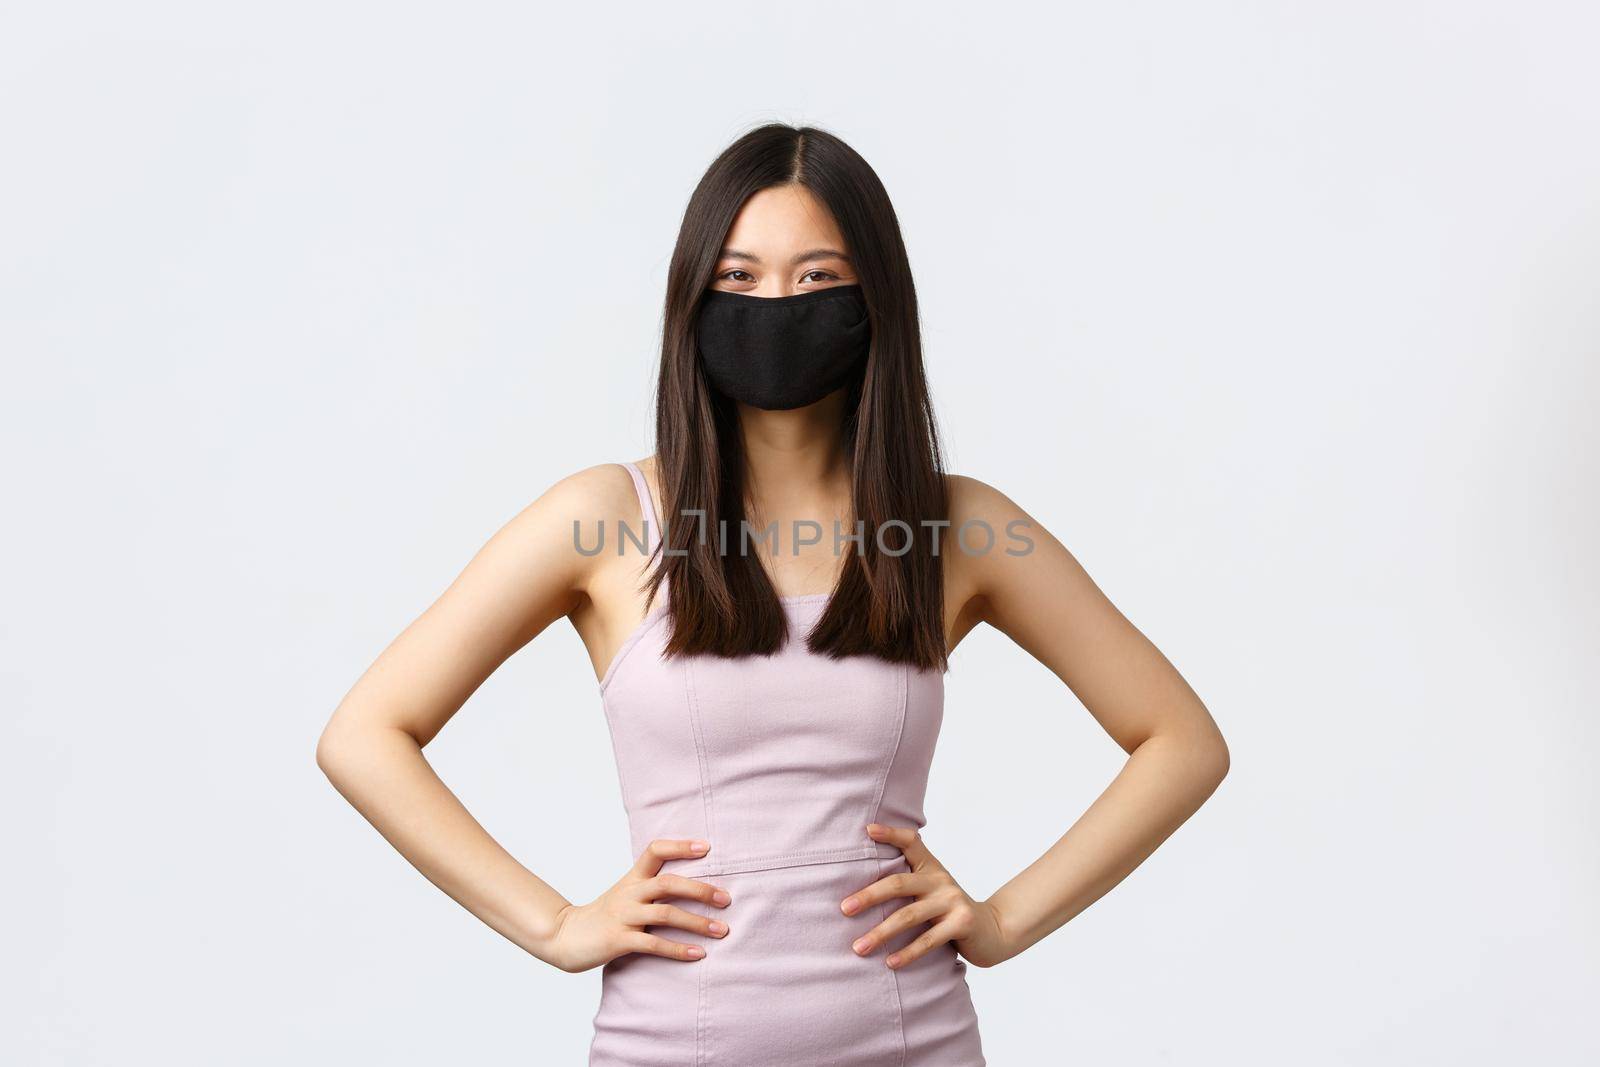 Covid-19, social distancing quarantine and leisure concept. Gorgeous and stylish asian woman in face mask, protect herself from coronavirus, attend party in elegant dress, white background.